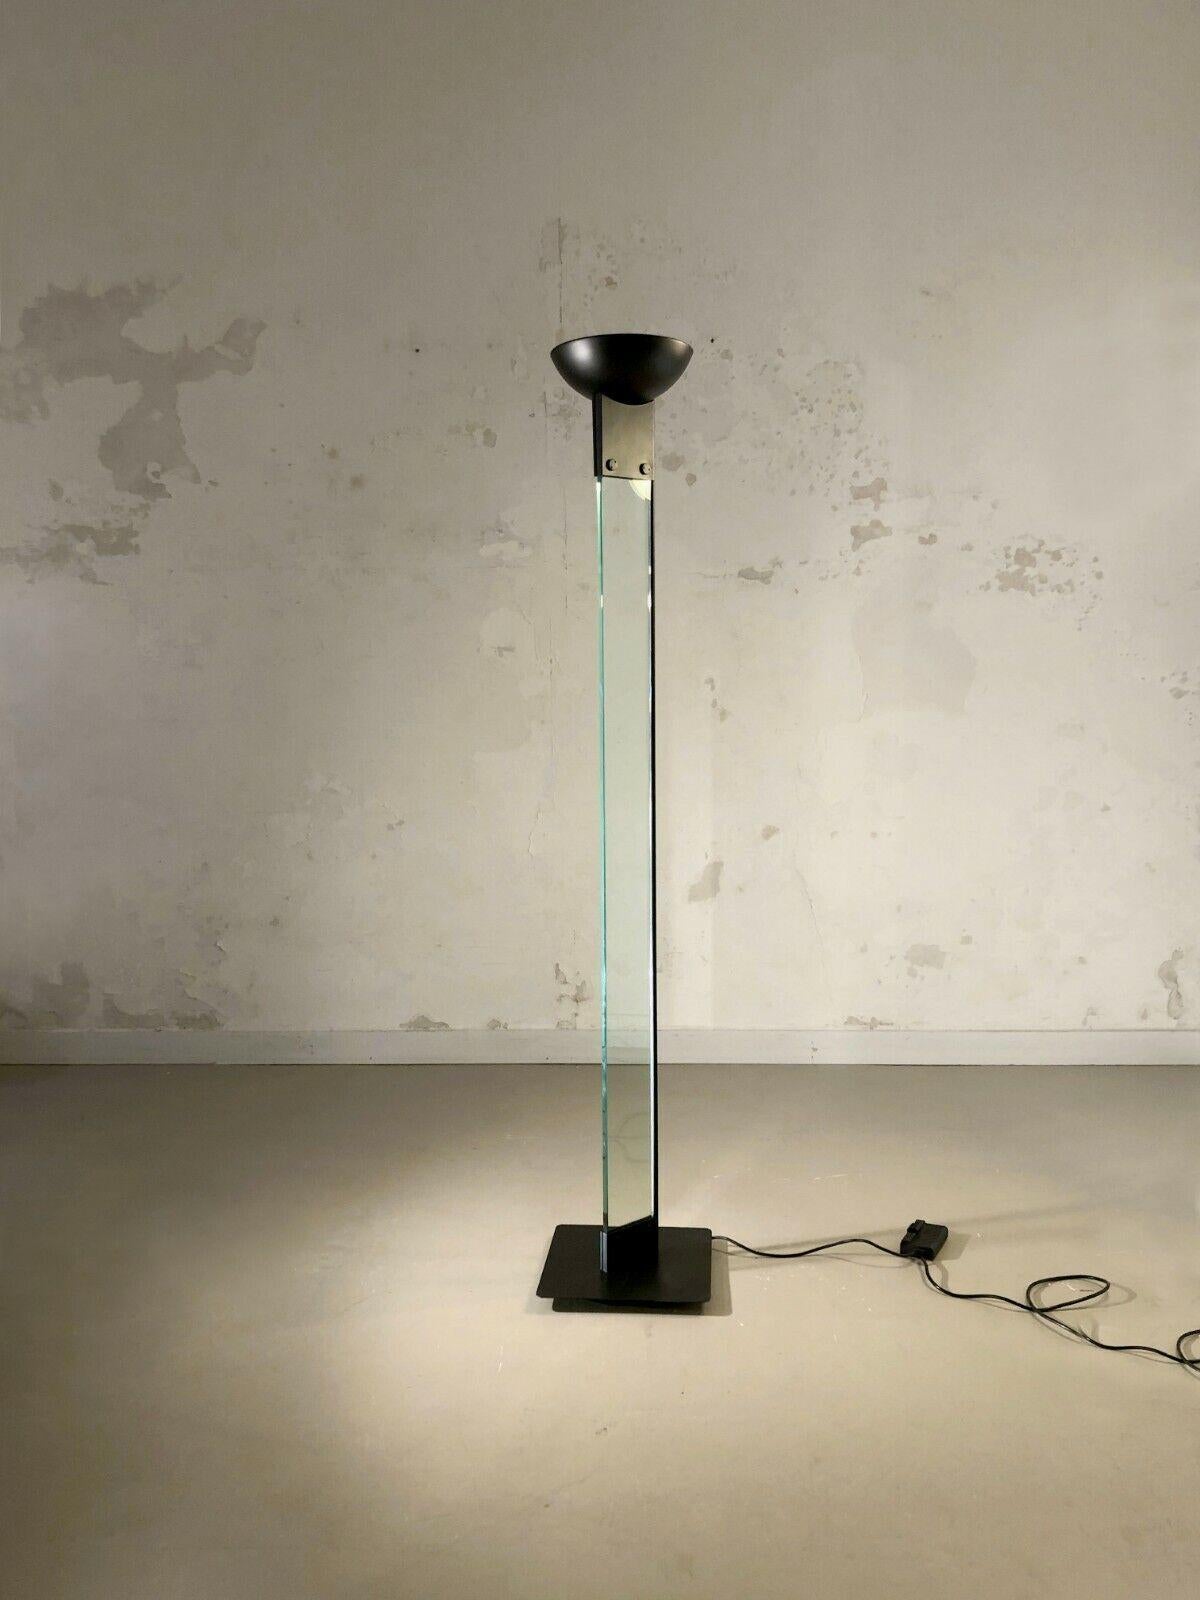 A large floor lamp that is both airy and rigorous, Post-Modernist, Bauhaus, Constructivist, Memphis, in black lacquered metal around a large strip of thick glass (from Murano?); “Laser Uplighter” model by Max Baguara, Lamperti edition, Italy